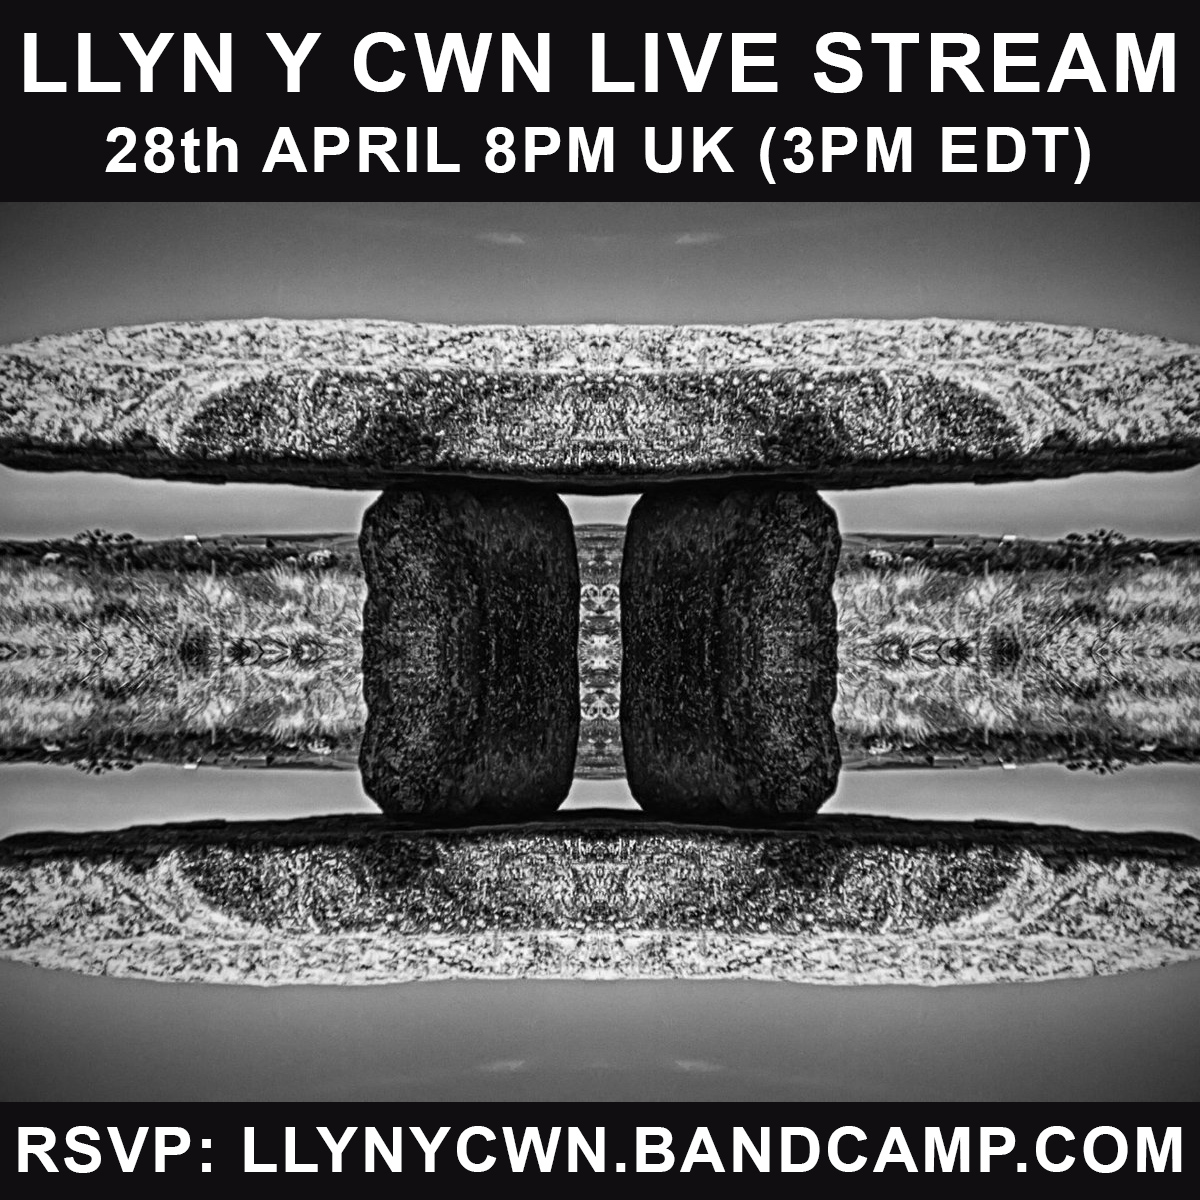 LLYN Y CWN live stream tomorrow at 8pm UK (3pm EDT) on Bandcamp. #darkambient RSVP now! llynycwn.bandcamp.com/merch/megalith… Recording of a live gig, Bristol 01/02/04 streamed in full with visuals. Ben will be in the chat to answer any questions. Out now: LLYN Y CWN 'Megaliths' CD.